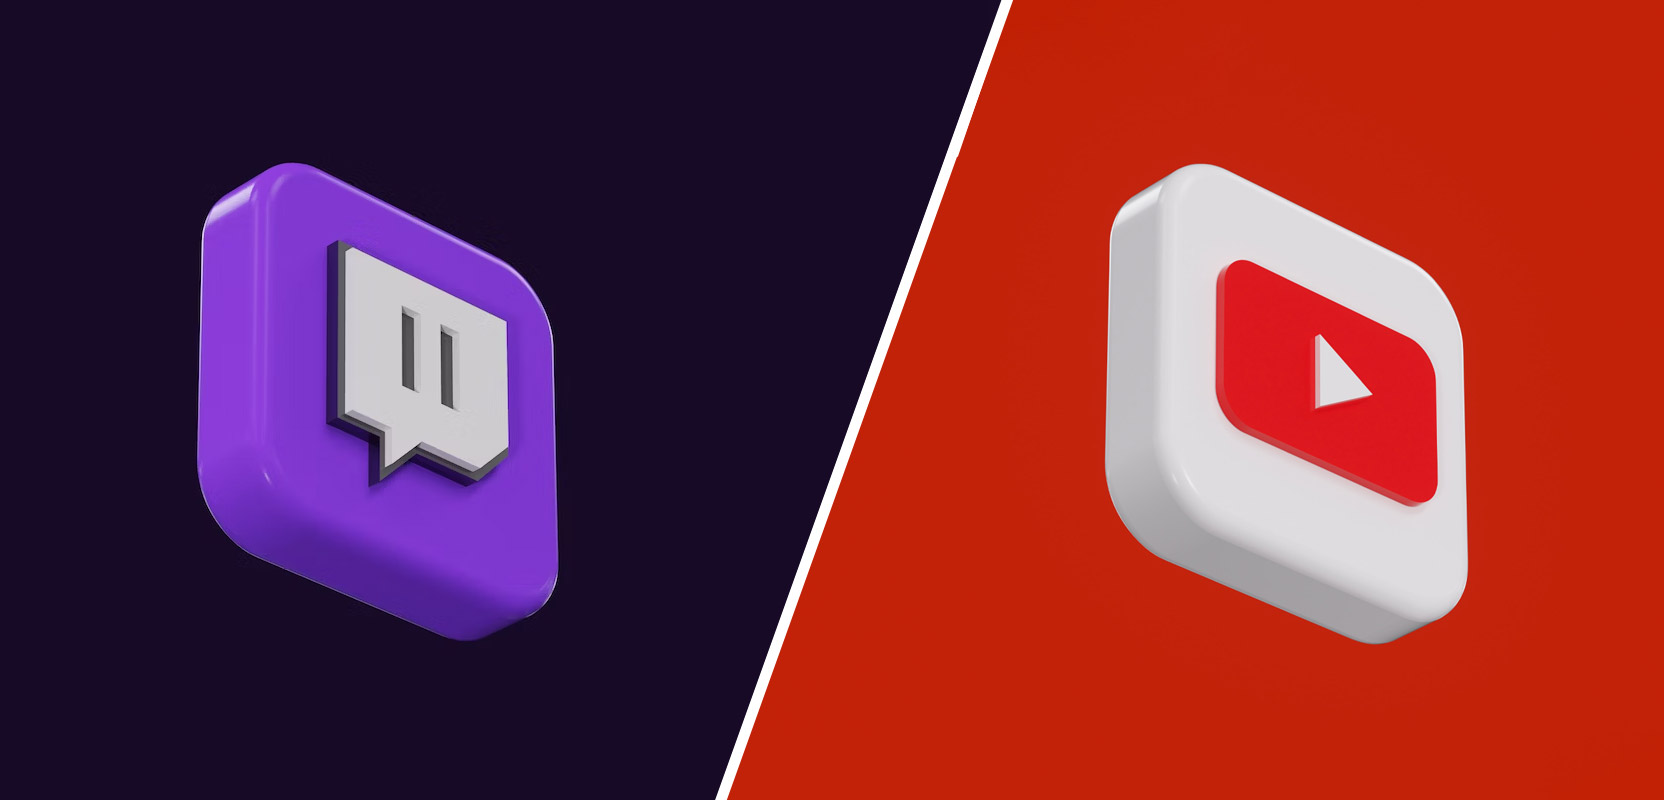 Twitch and YouTube icons side by side